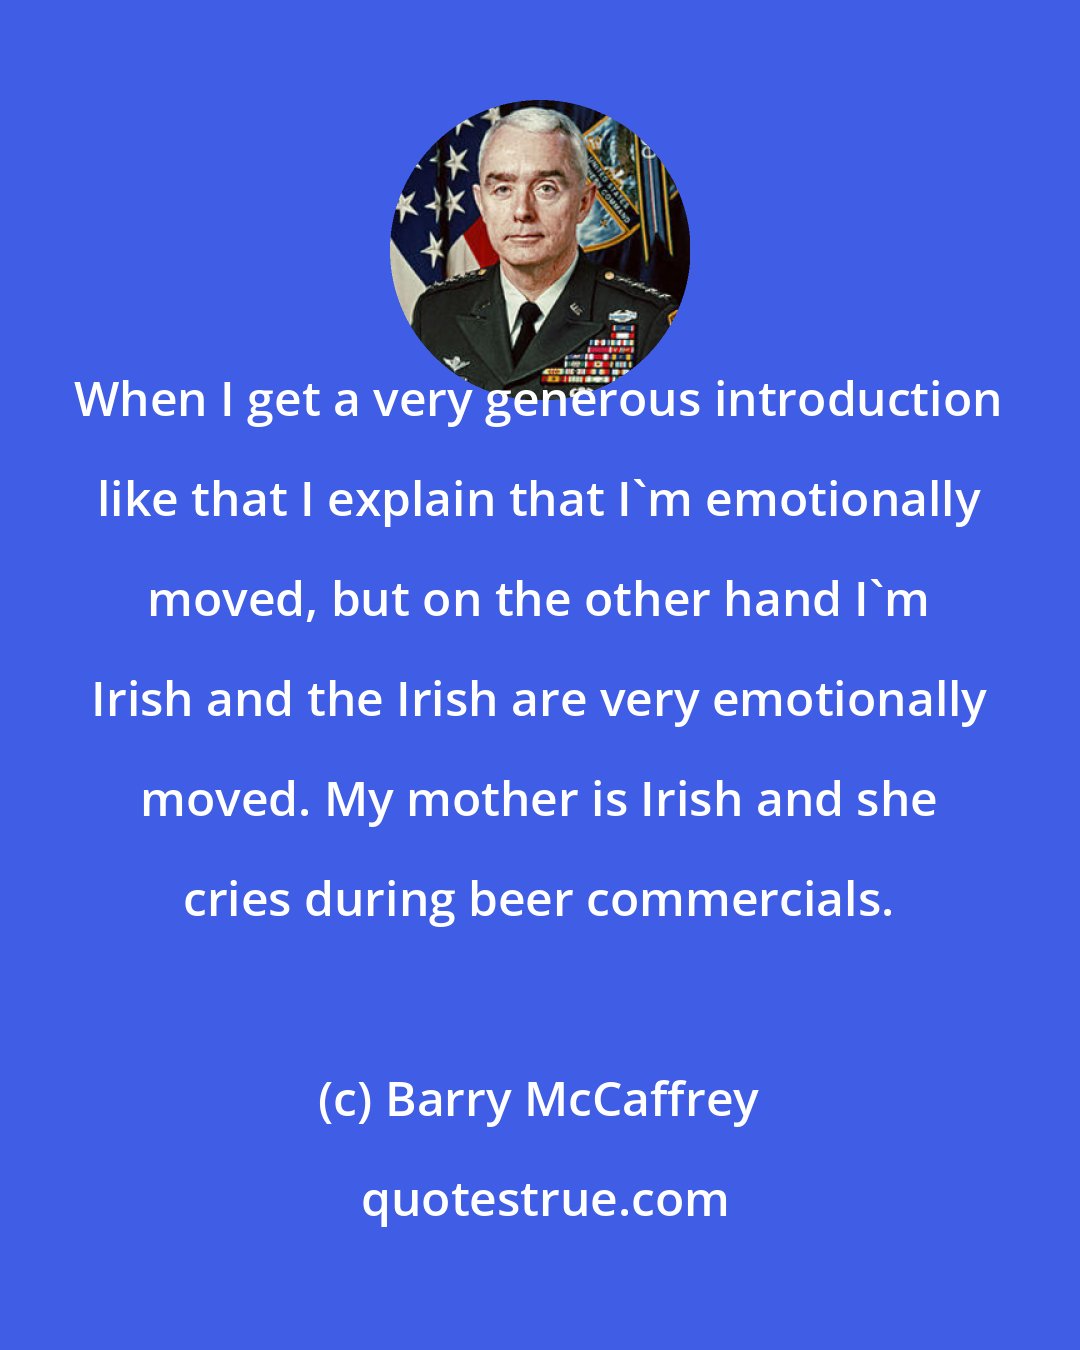 Barry McCaffrey: When I get a very generous introduction like that I explain that I'm emotionally moved, but on the other hand I'm Irish and the Irish are very emotionally moved. My mother is Irish and she cries during beer commercials.